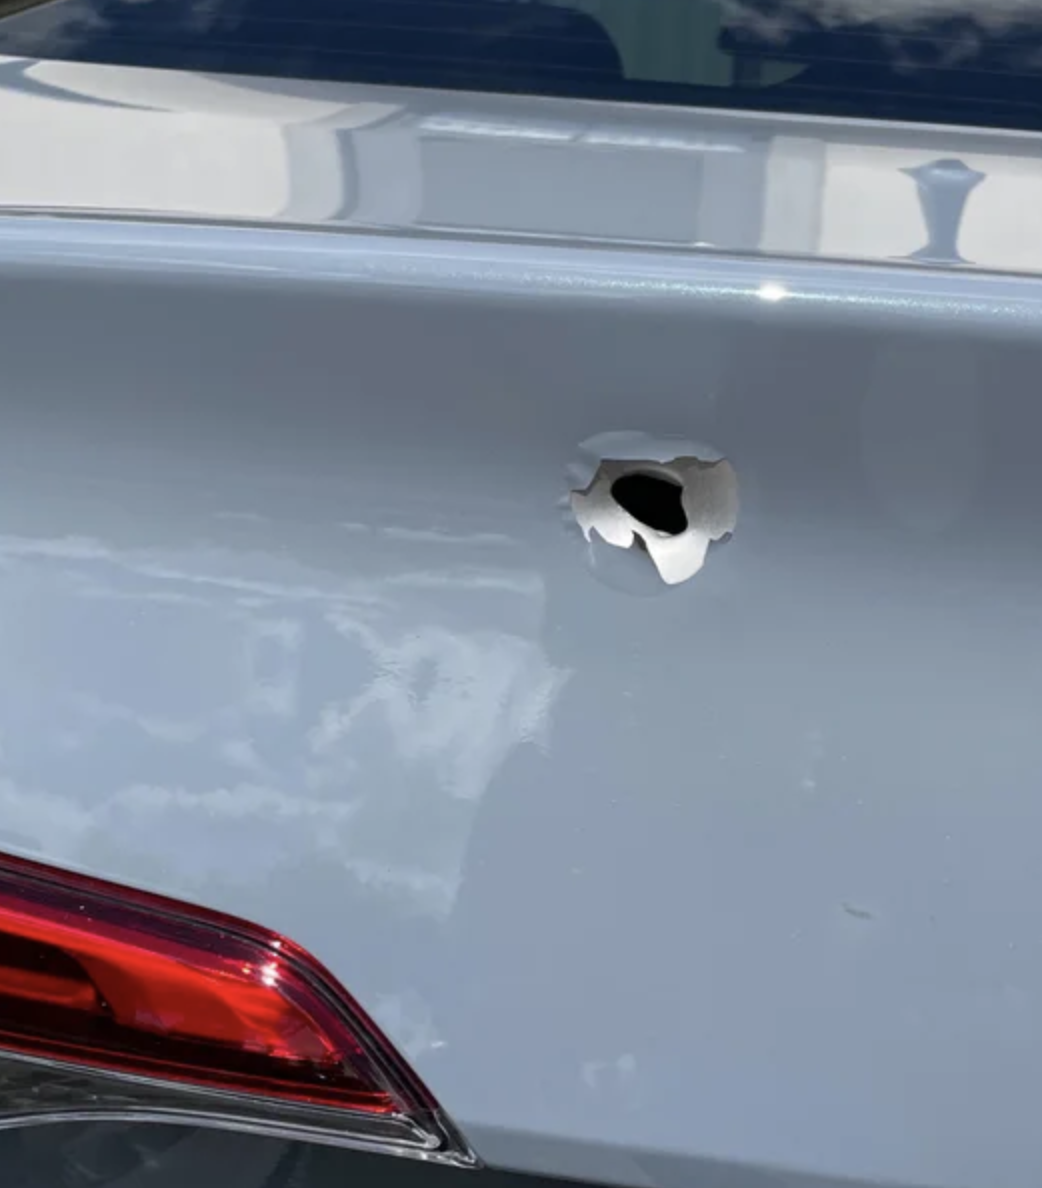 Someone shot my brand new car 3 days after I picked it up.